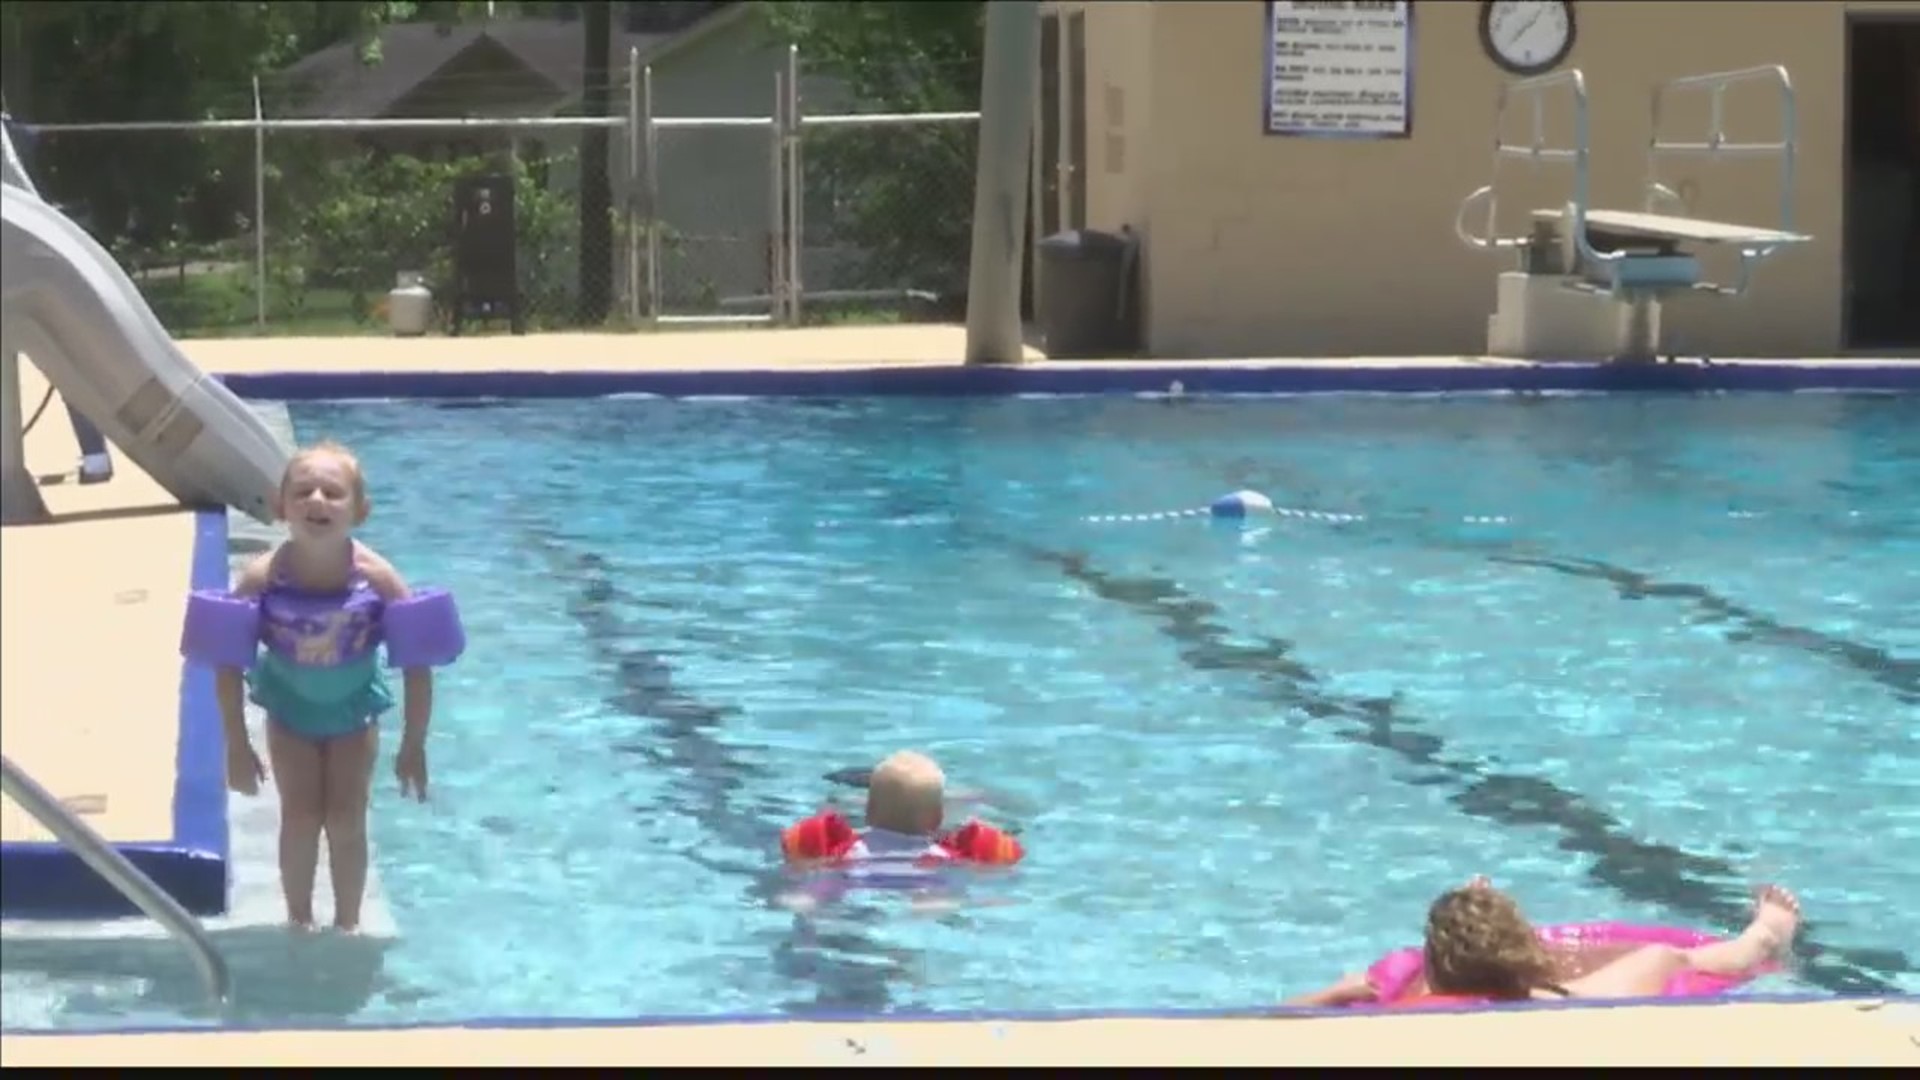 With a lot going on around pools, lifeguards want you to remember to be safe.